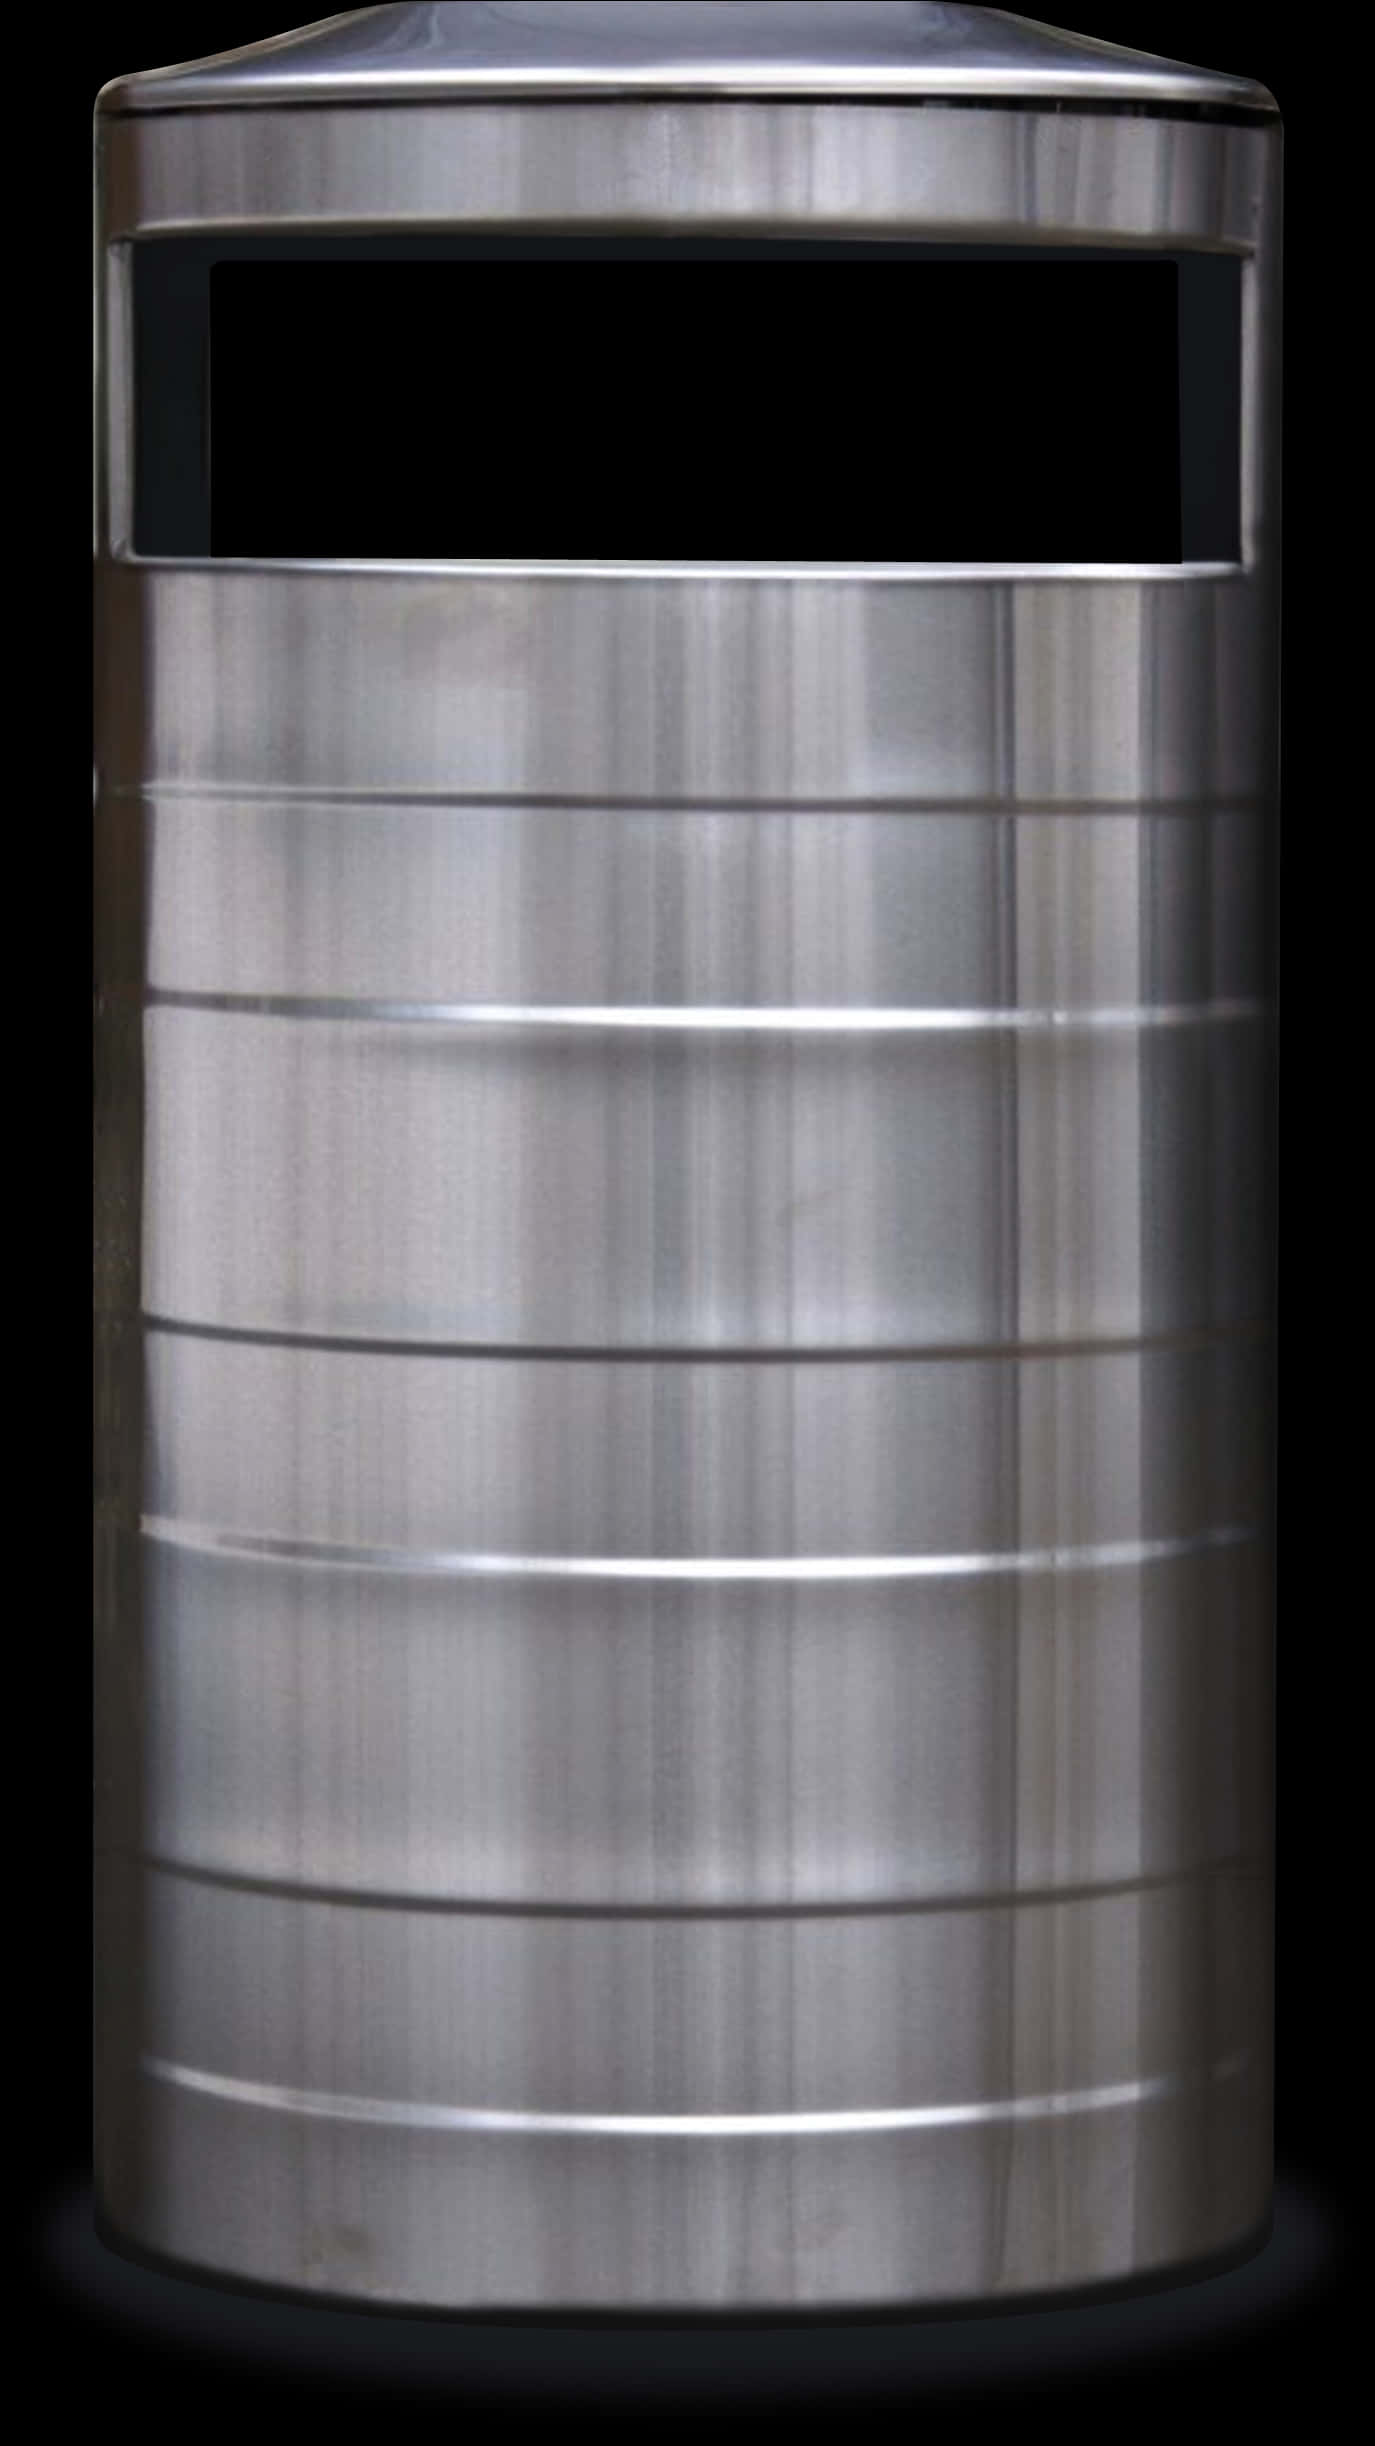 A Silver Trash Can With A Black Lid